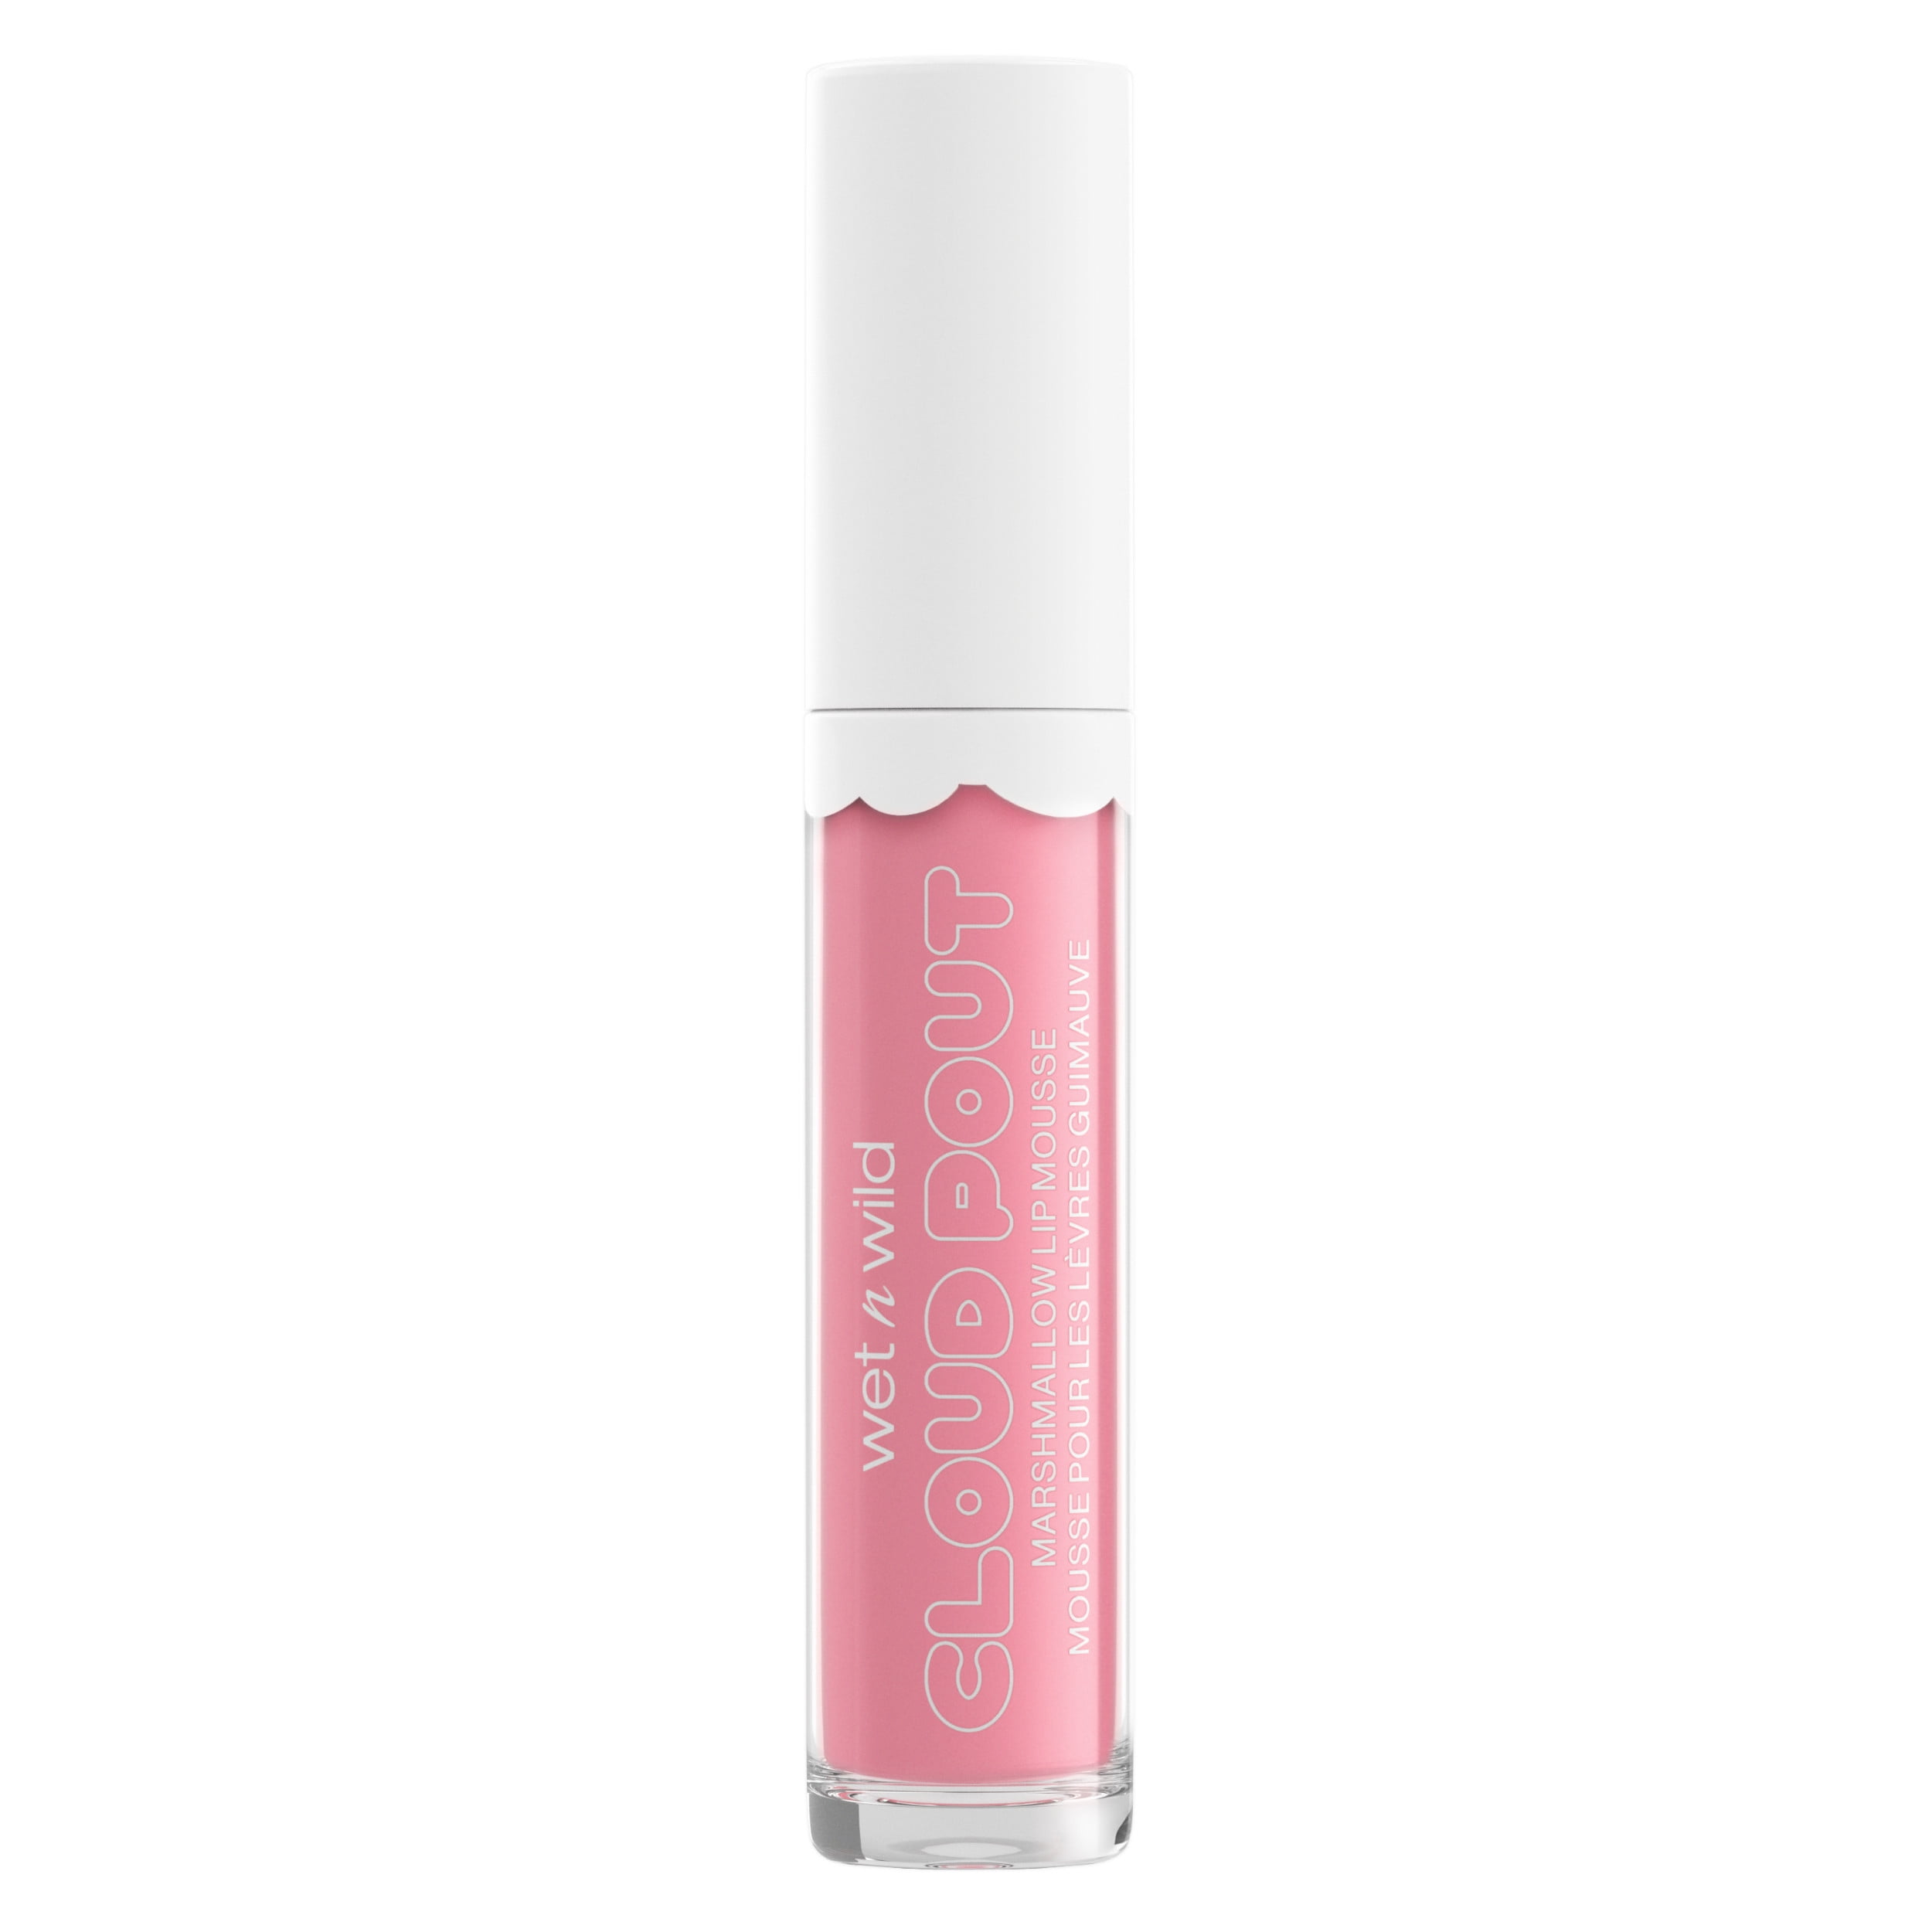 wet n wild Cloud Pout Lightweight Gloss Lipstick with Vitamin E, Cloud Chaser, Full Size